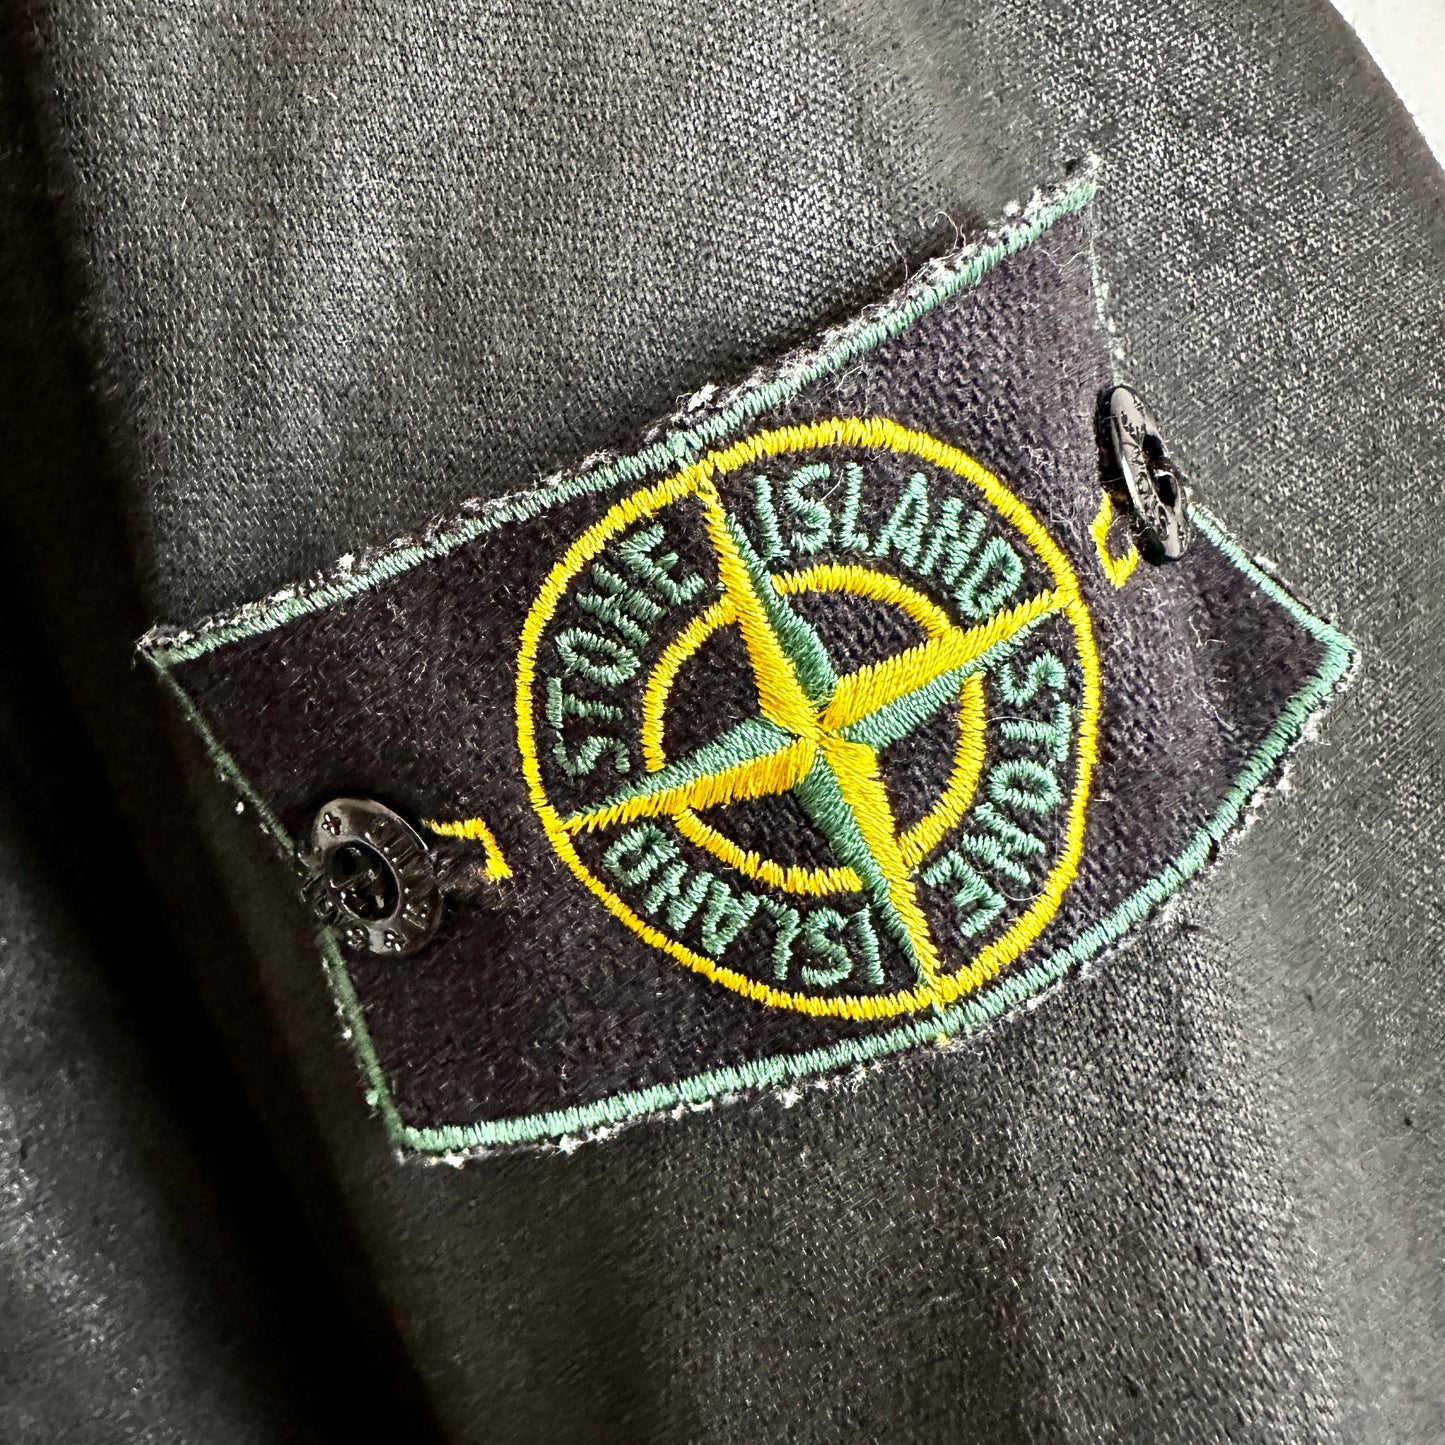 Stone Island Vintage 1996 Dutch Rope Lining Jacket - XL - Made in Italy